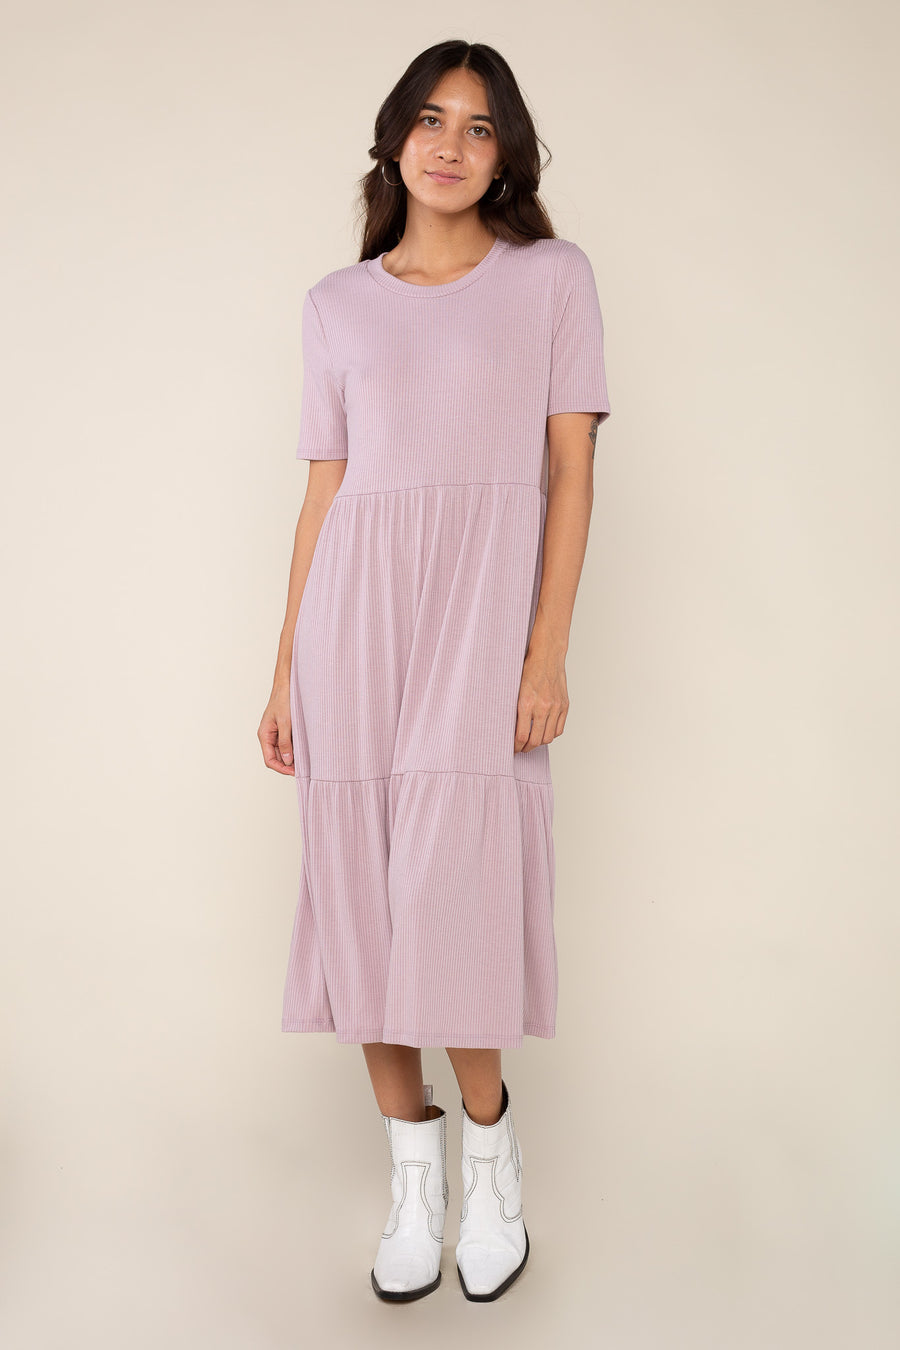 Clementine Dress in Lilac (Final Sale)